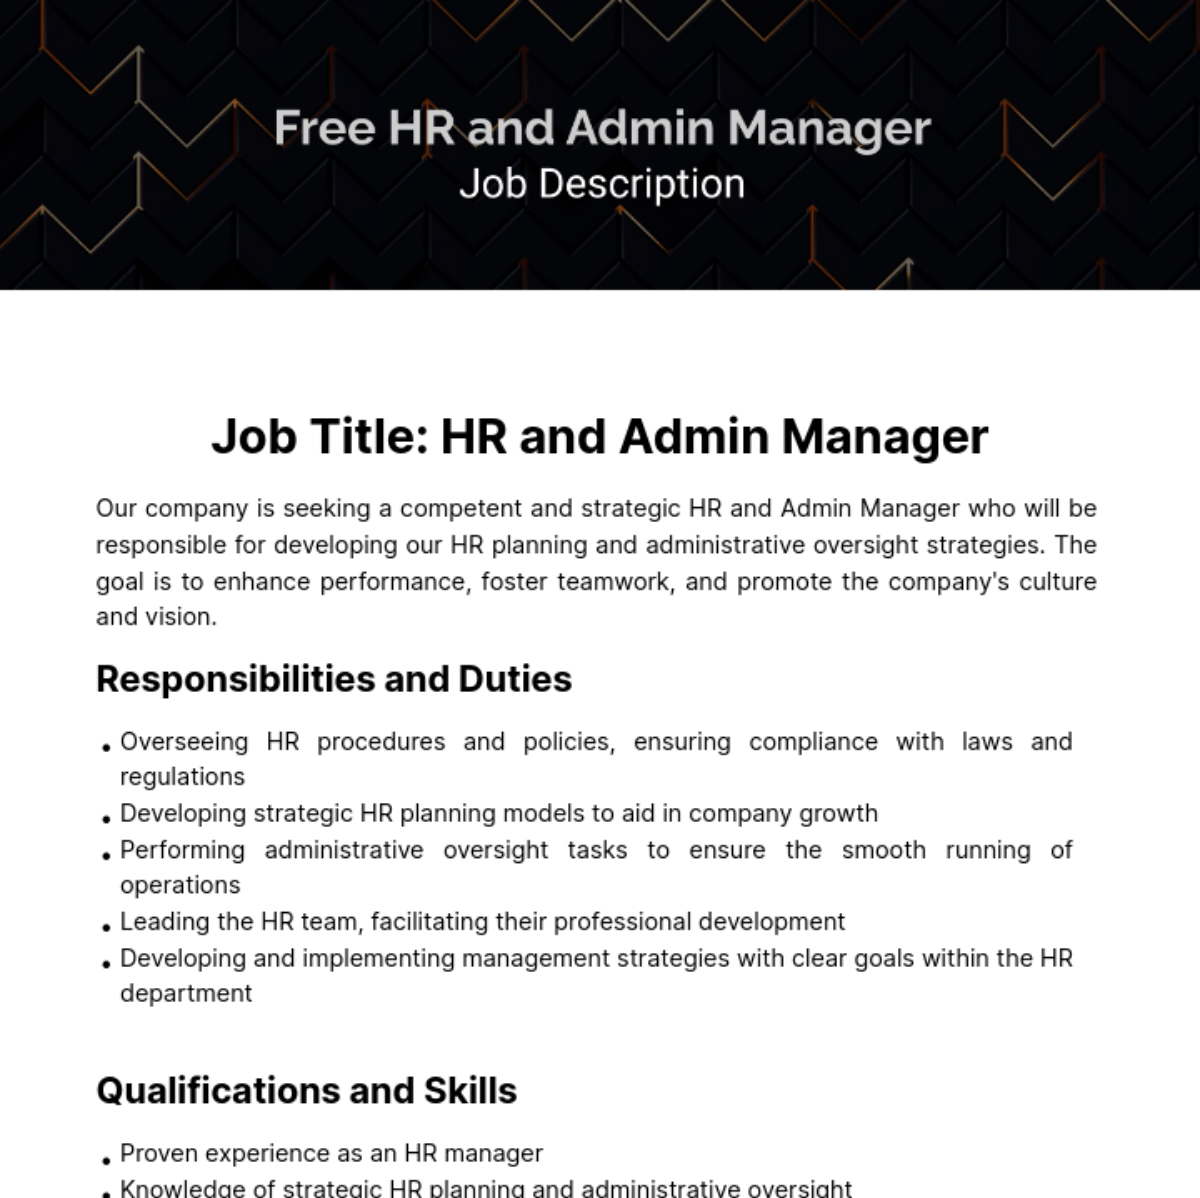 Human Resources (HR) and Admin Manager Job Description Template